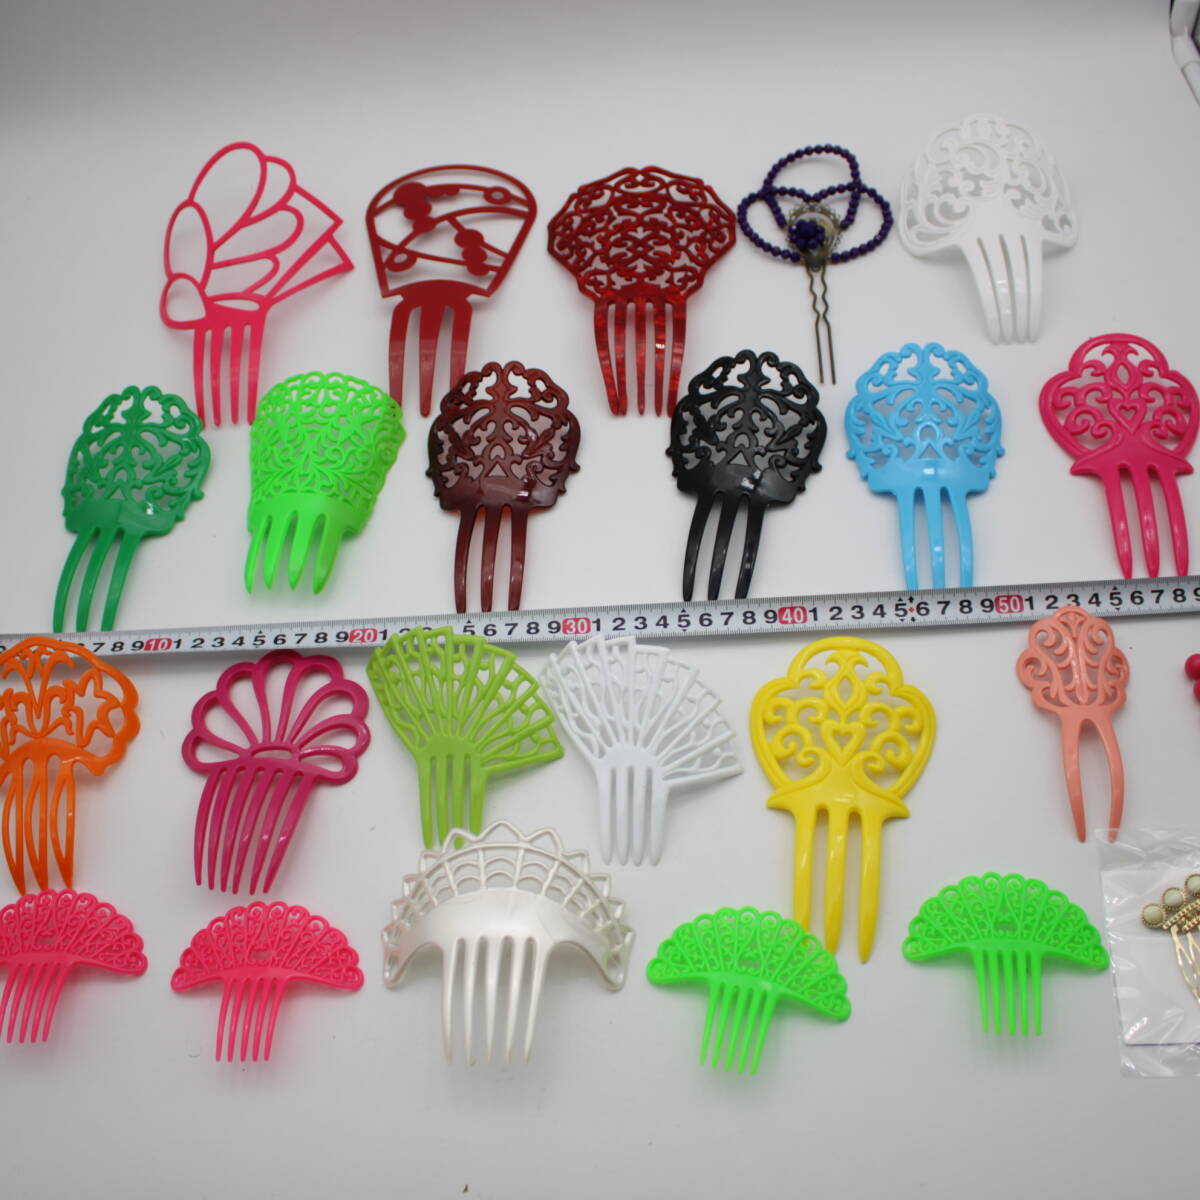 [ free shipping ][ large amount all 24 point flamenco for accessory ] large small pei joke material light weight * antique style contains set sale set plastic made of metal 